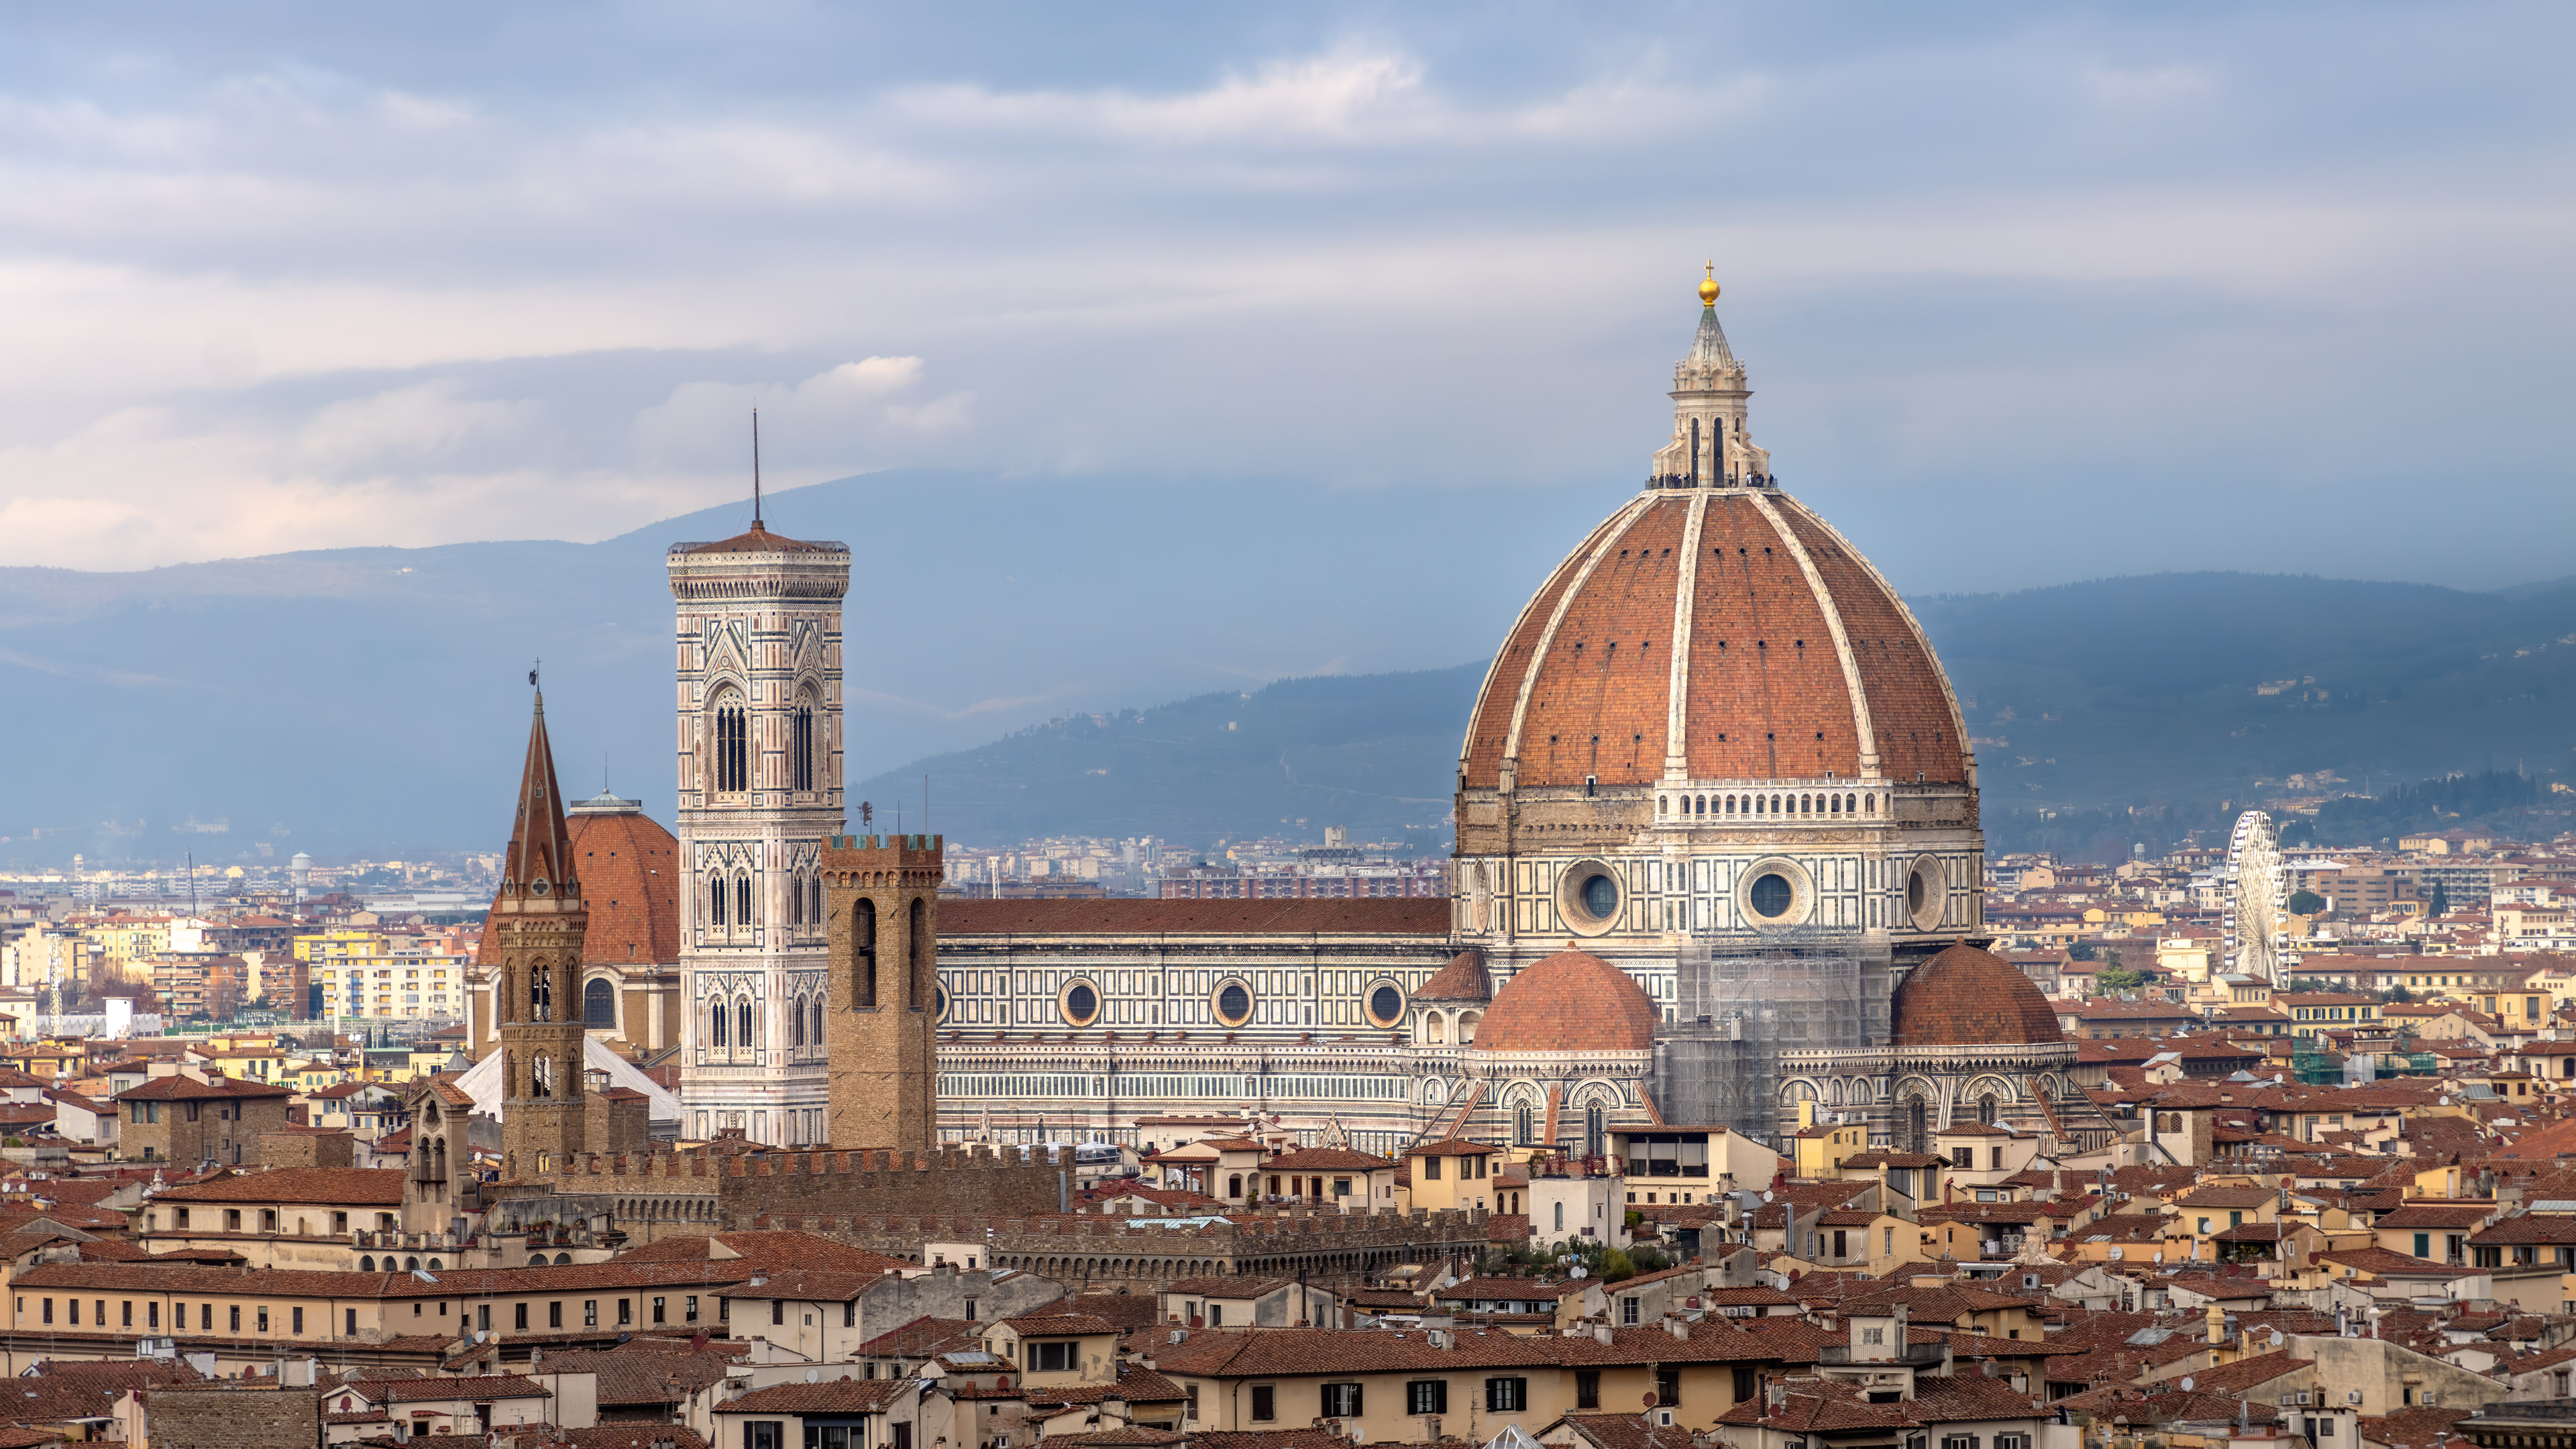 Get lost in the beauty of Florence with this high-resolution 4K city wallpaper. This breathtaking image features the iconic Duomo Cathedral making it the perfect choice for any cityscape lover.